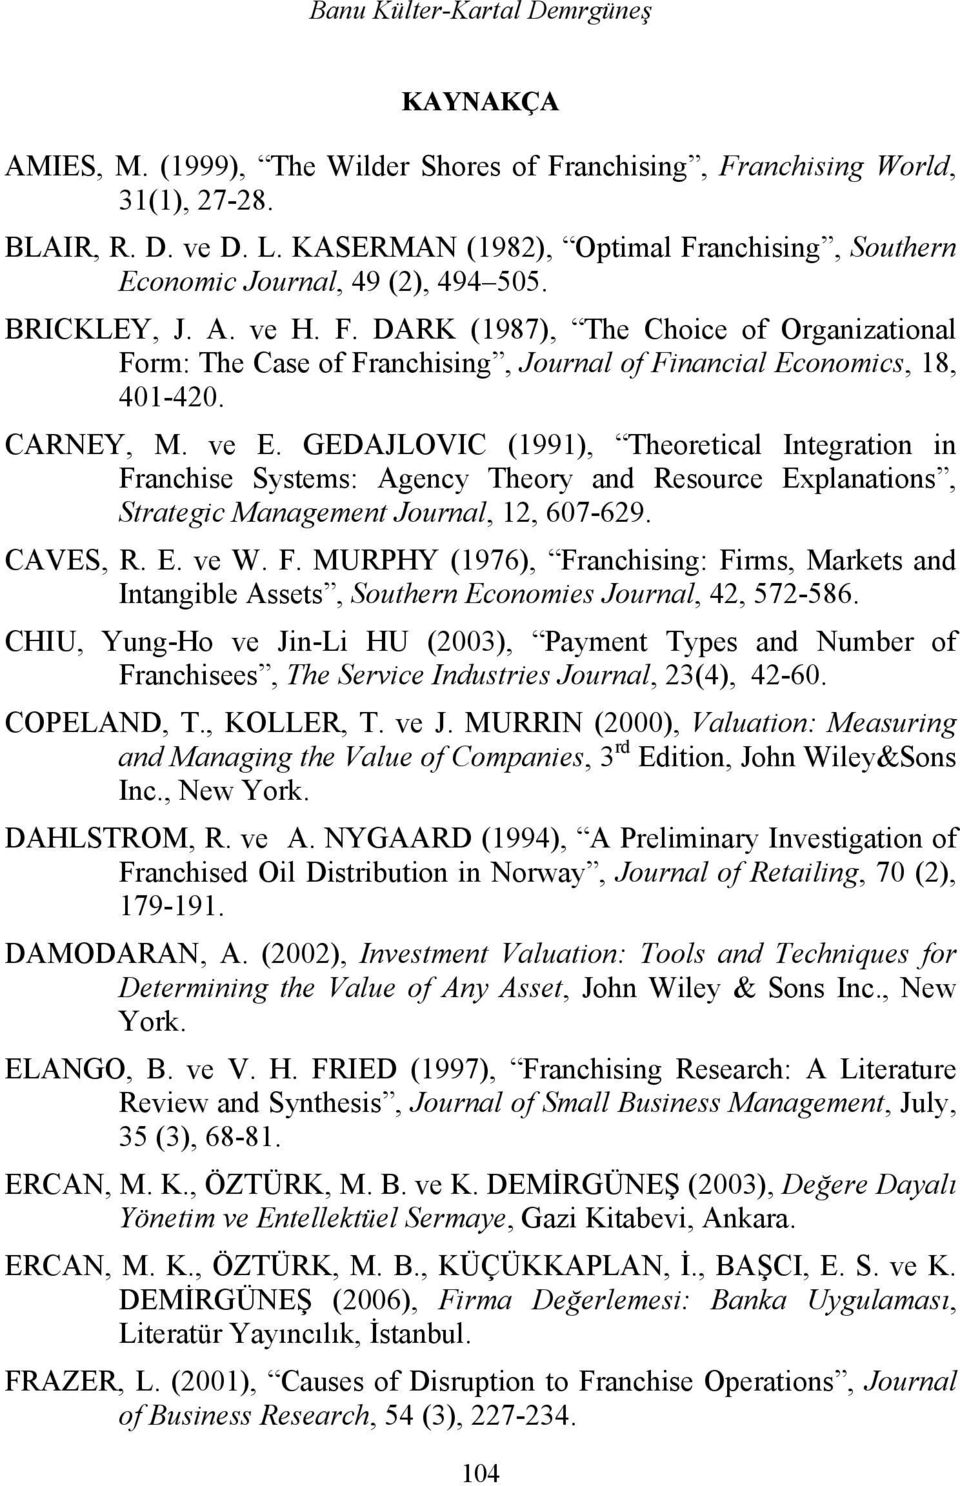 CARNEY, M. ve E. GEDAJLOVIC (1991), Theoretical Integration in Franchise Systems: Agency Theory and Resource Explanations, Strategic Management Journal, 12, 607-629. CAVES, R. E. ve W. F. MURPHY (1976), Franchising: Firms, Markets and Intangible Assets, Southern Economies Journal, 42, 572-586.